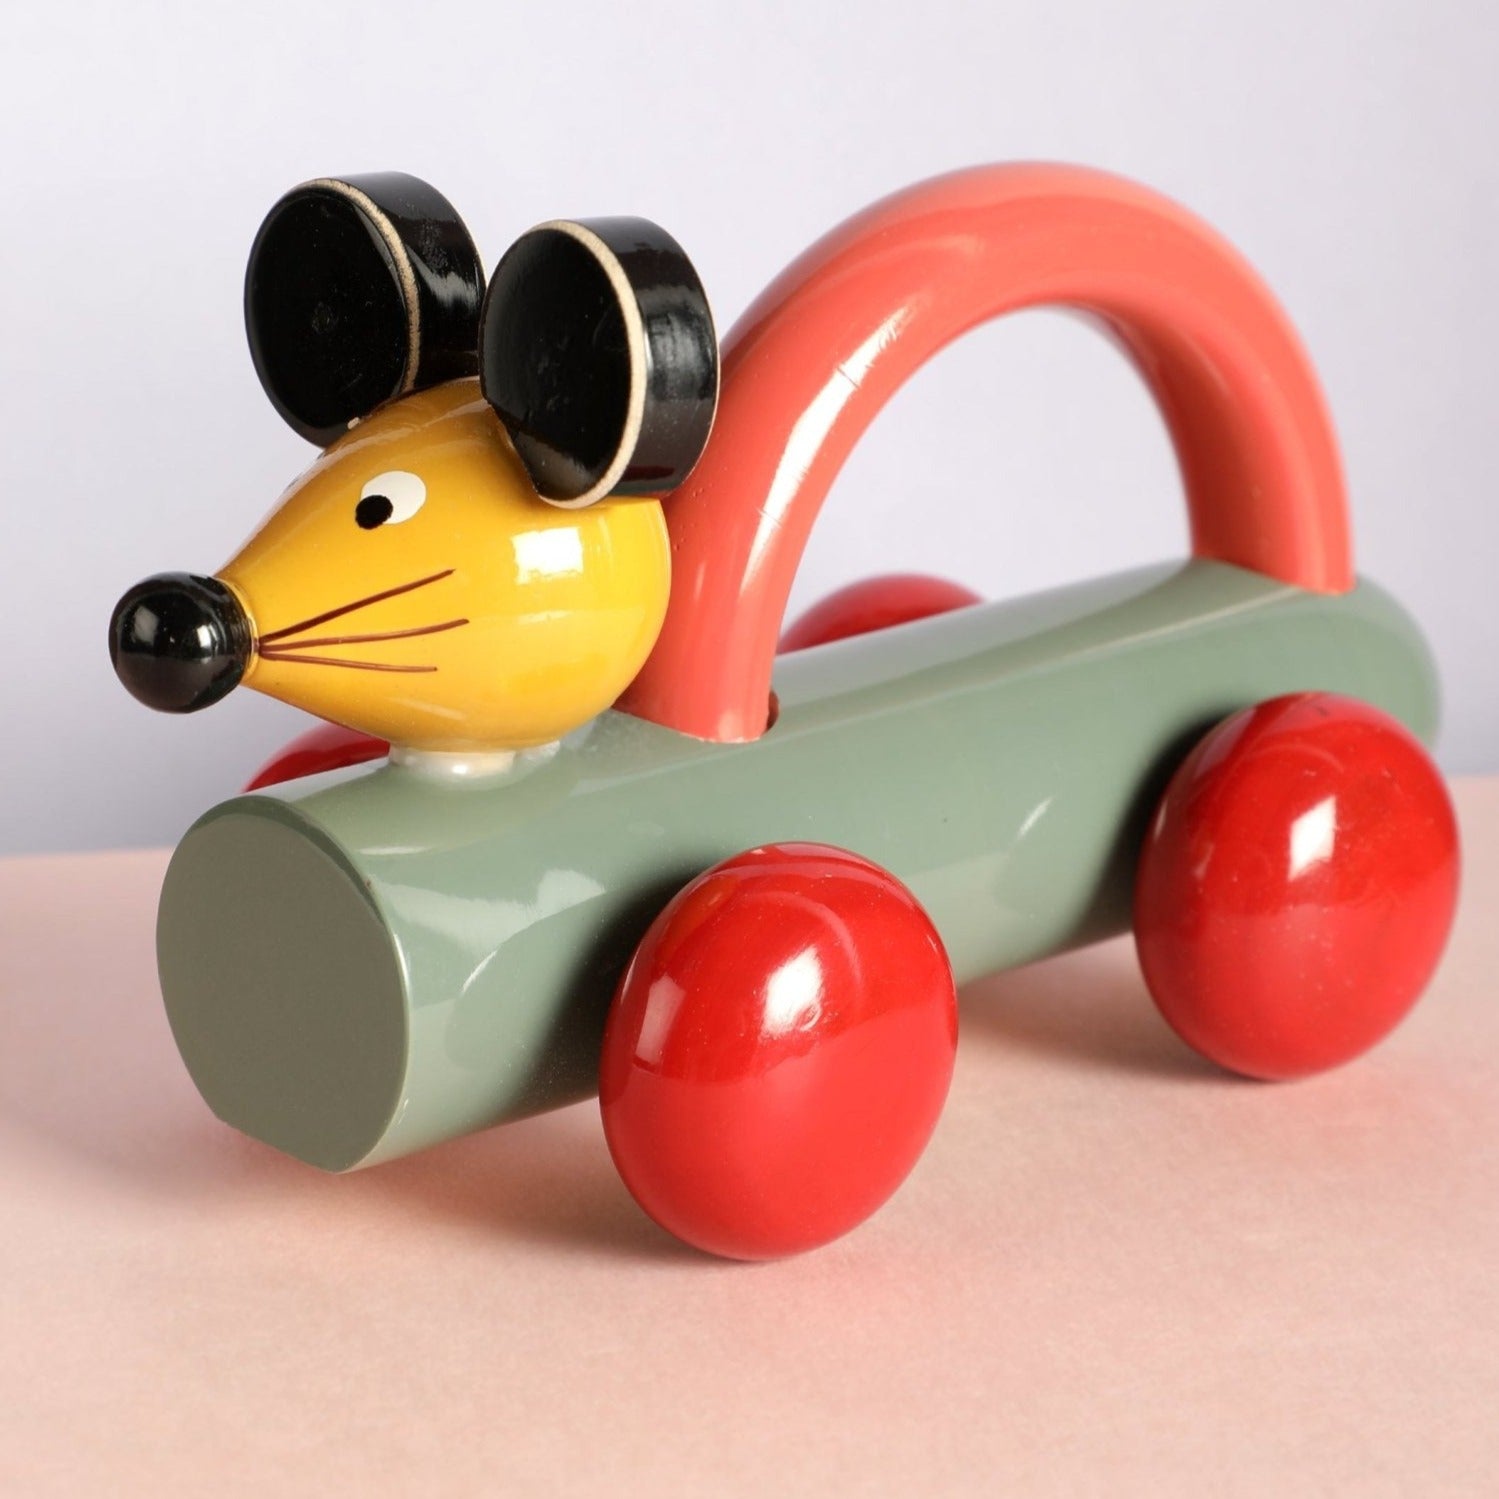 a toy mouse driving a toy car on a table